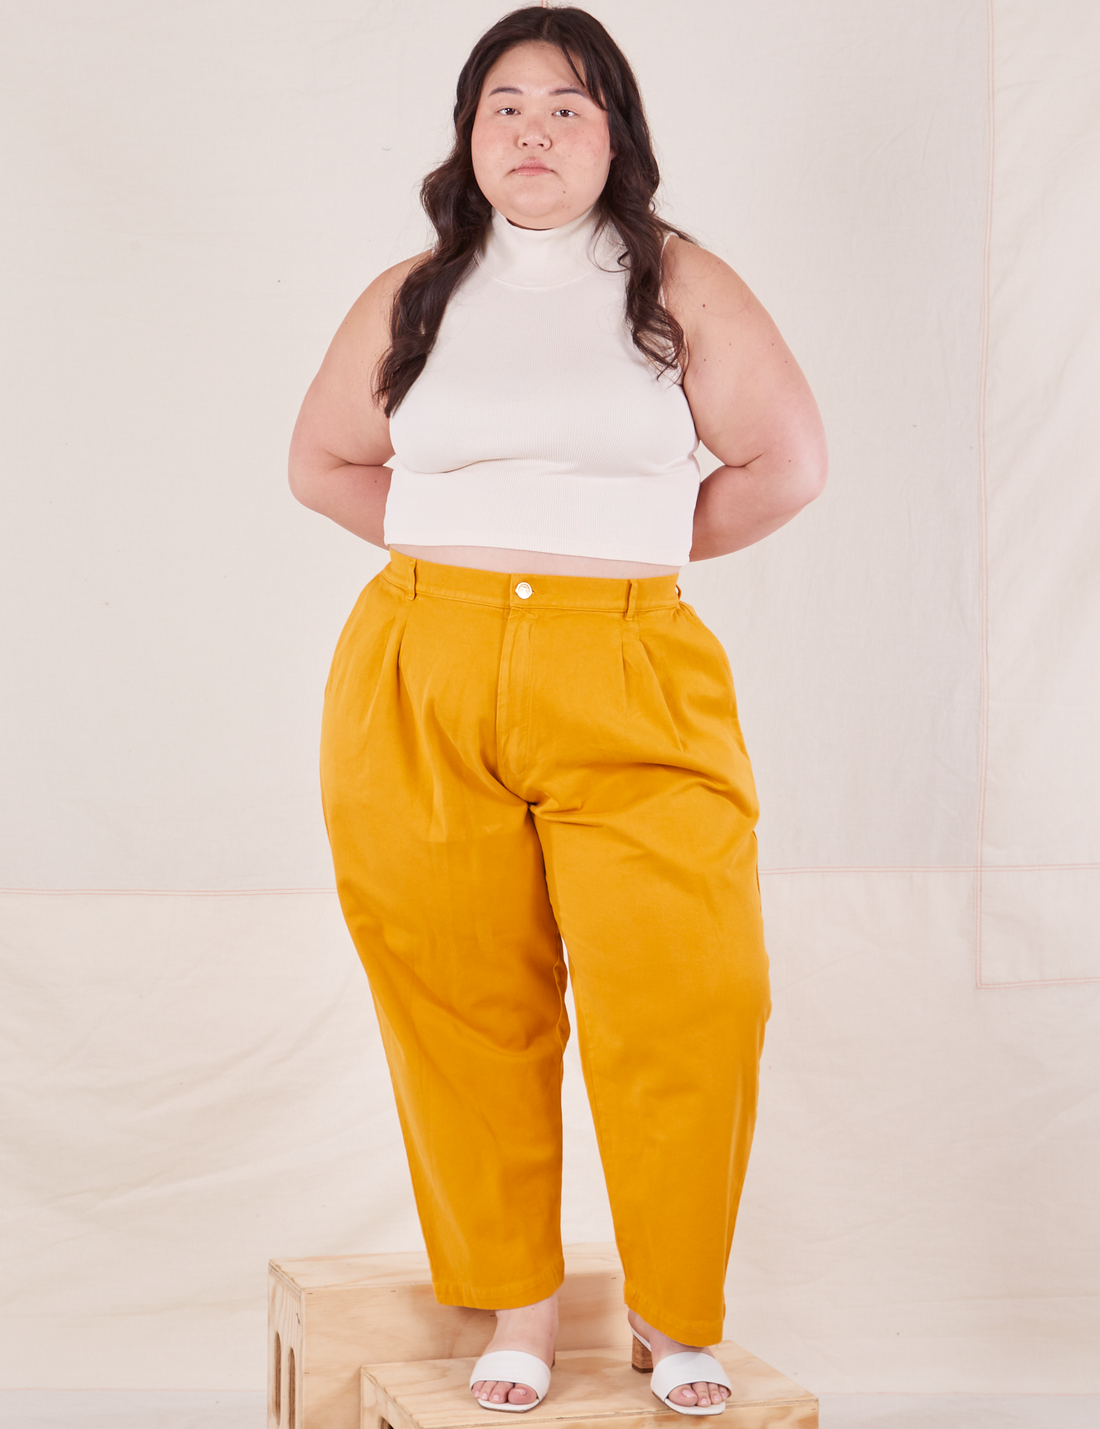 Ashley is 5'7" and wearing 1XL Petite Organic Trousers in Mustard Yellow paired with vintage off-white Sleeveless Essential Turtleneck